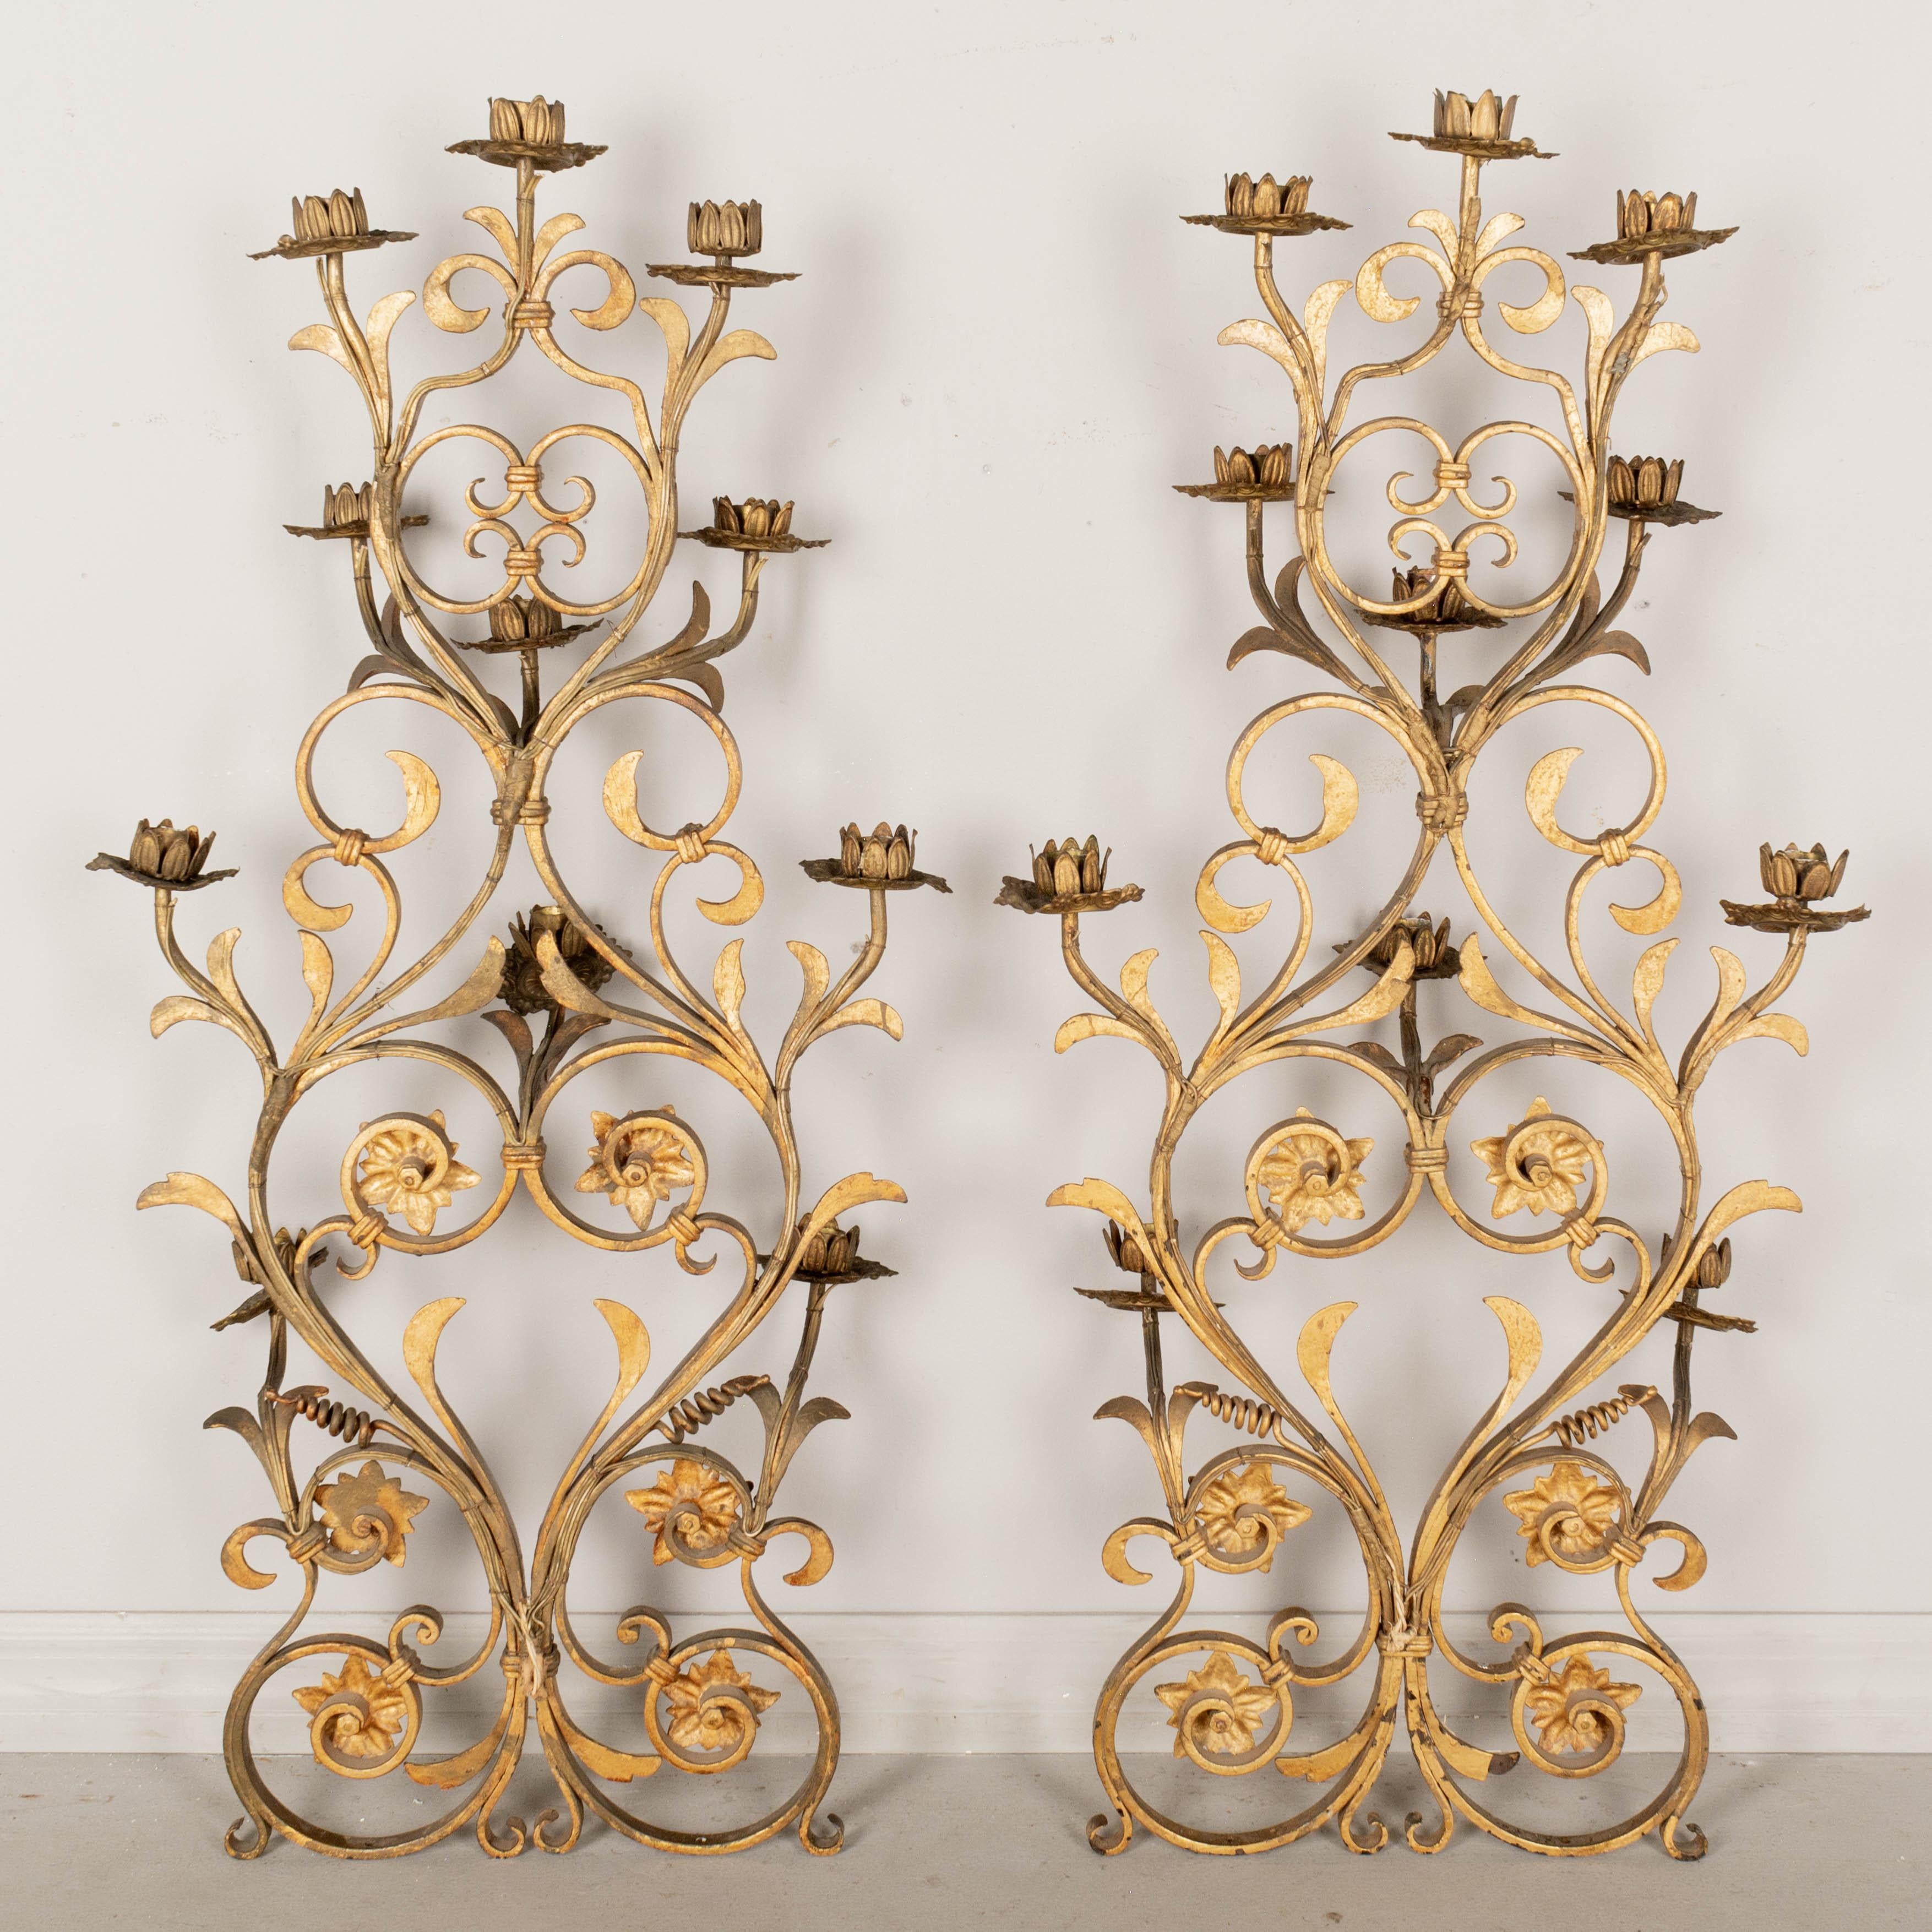 Wrought Iron French Gilded Iron Candle Sconces For Sale